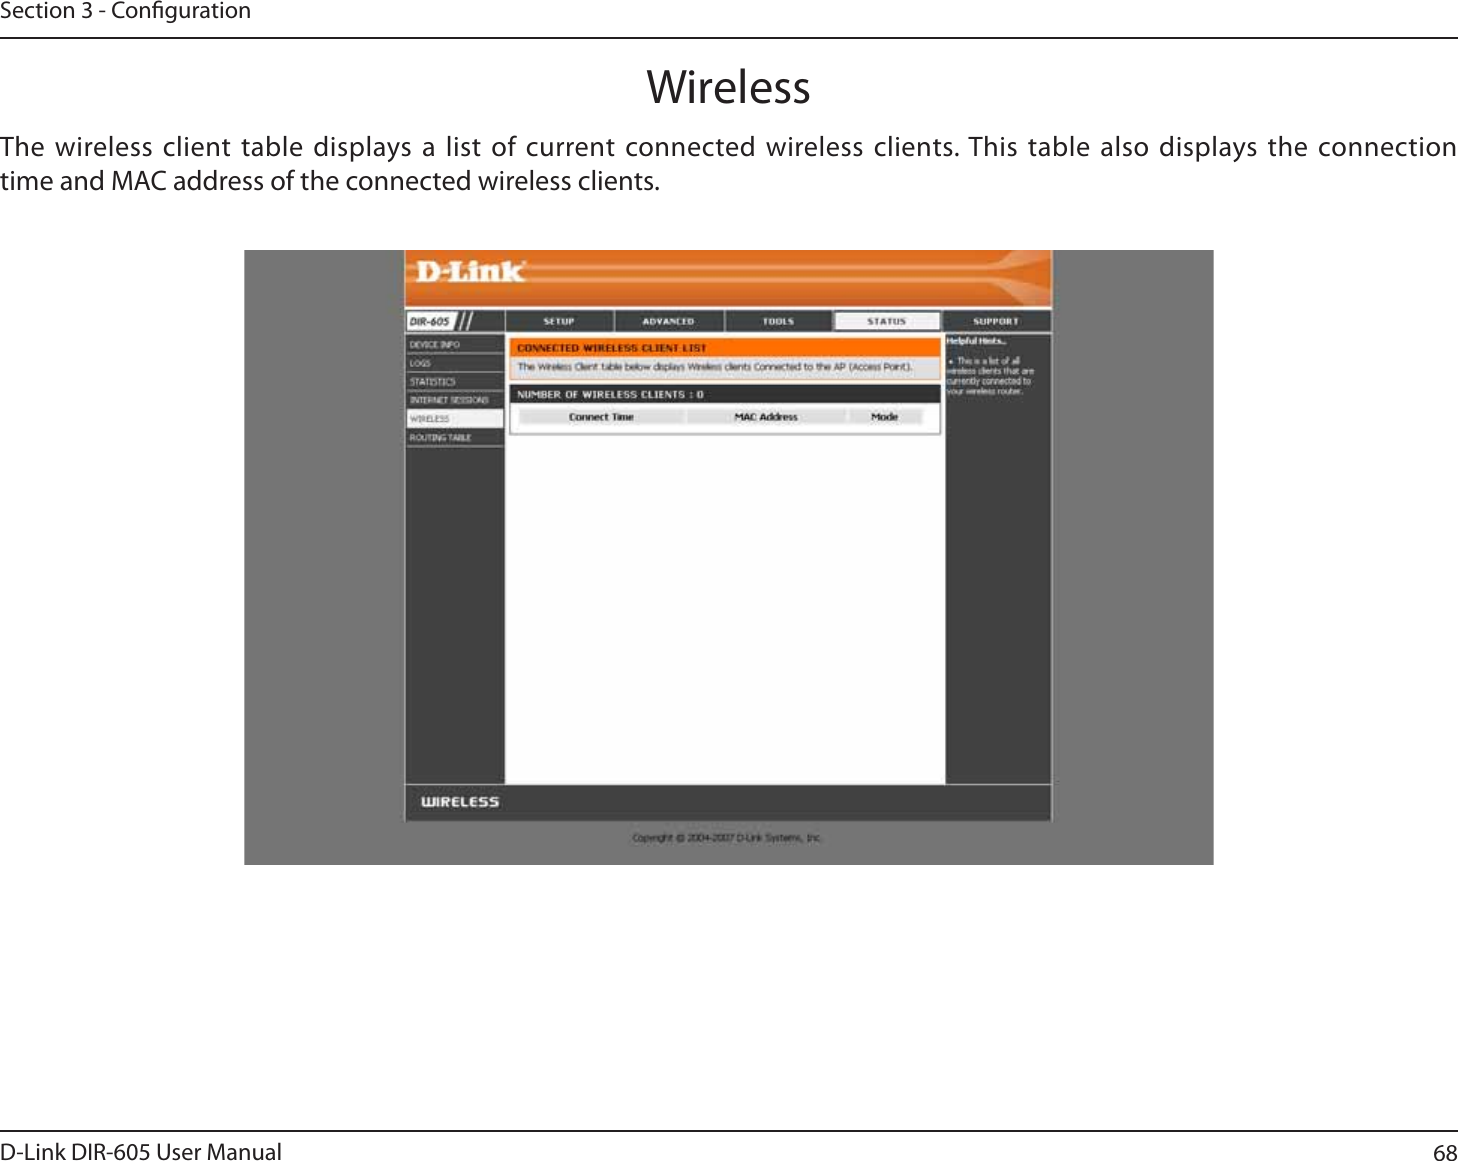 68D-Link DIR-605 User ManualSection 3 - CongurationThe wireless client table displays a list of current connected wireless clients. This table also displays the connection time and MAC address of the connected wireless clients.Wireless